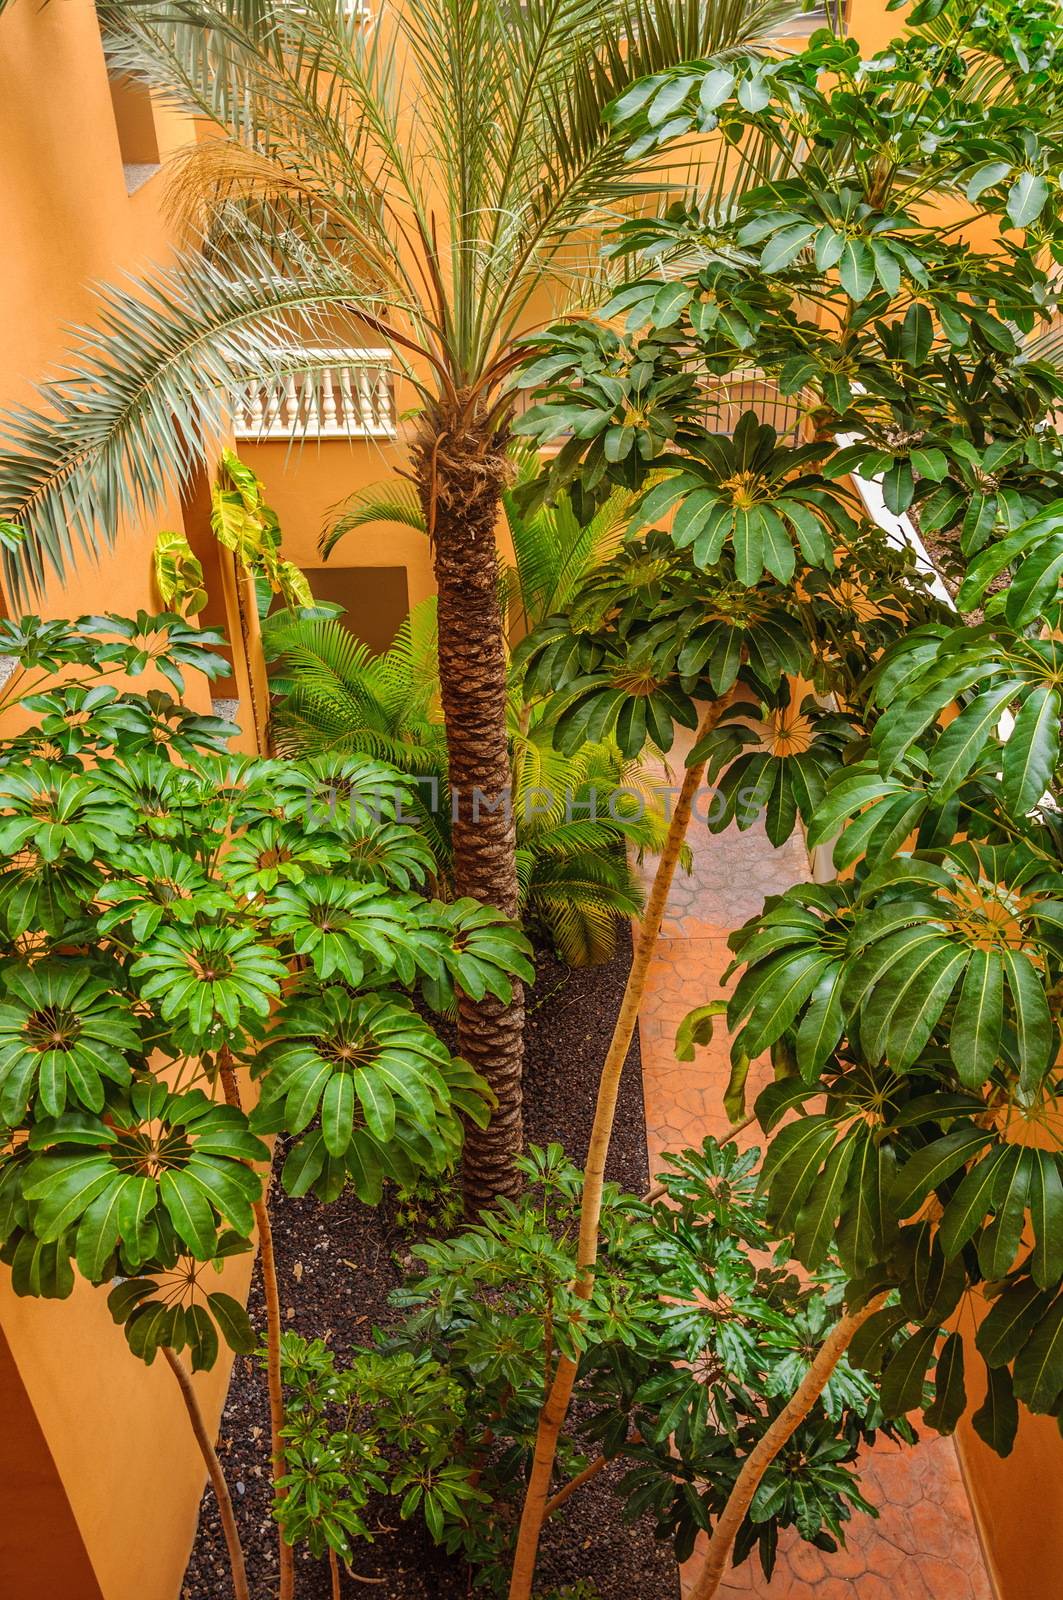 Palms and trees of hotel courtyard in Tenerife, Spain by Eagle2308